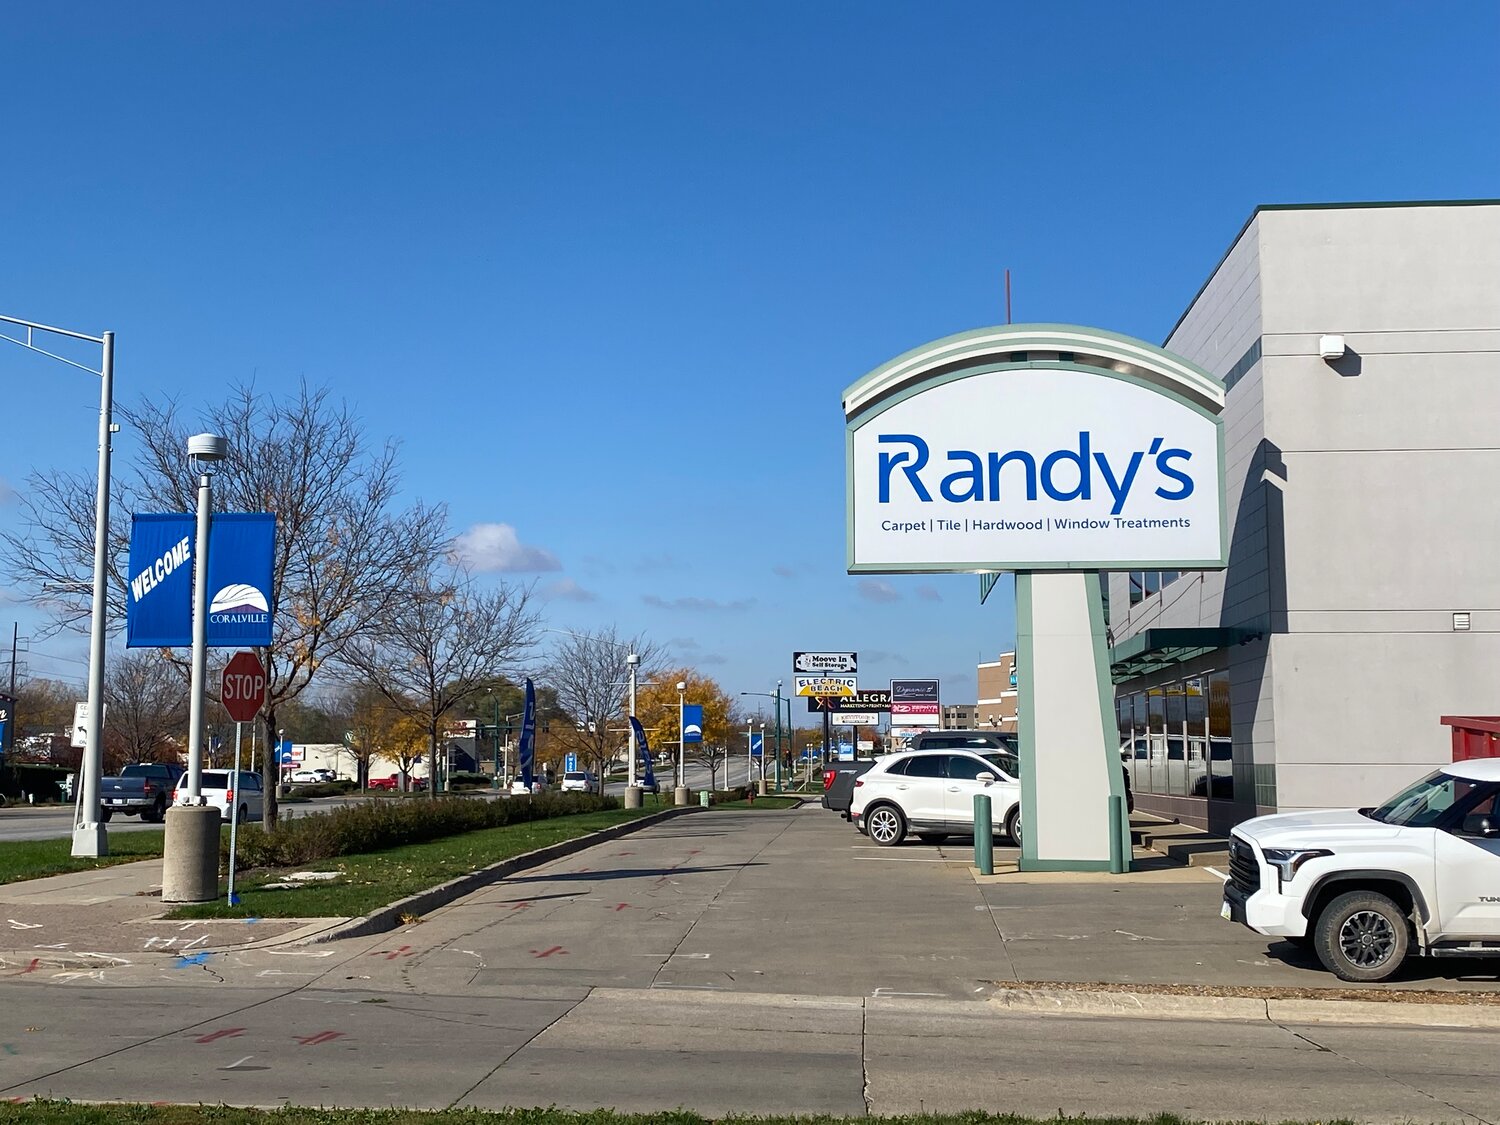 Randy’s Local Flooring Experts, By Design, located at 401 2nd Street in Coralville, is celebrating 47 years in business.